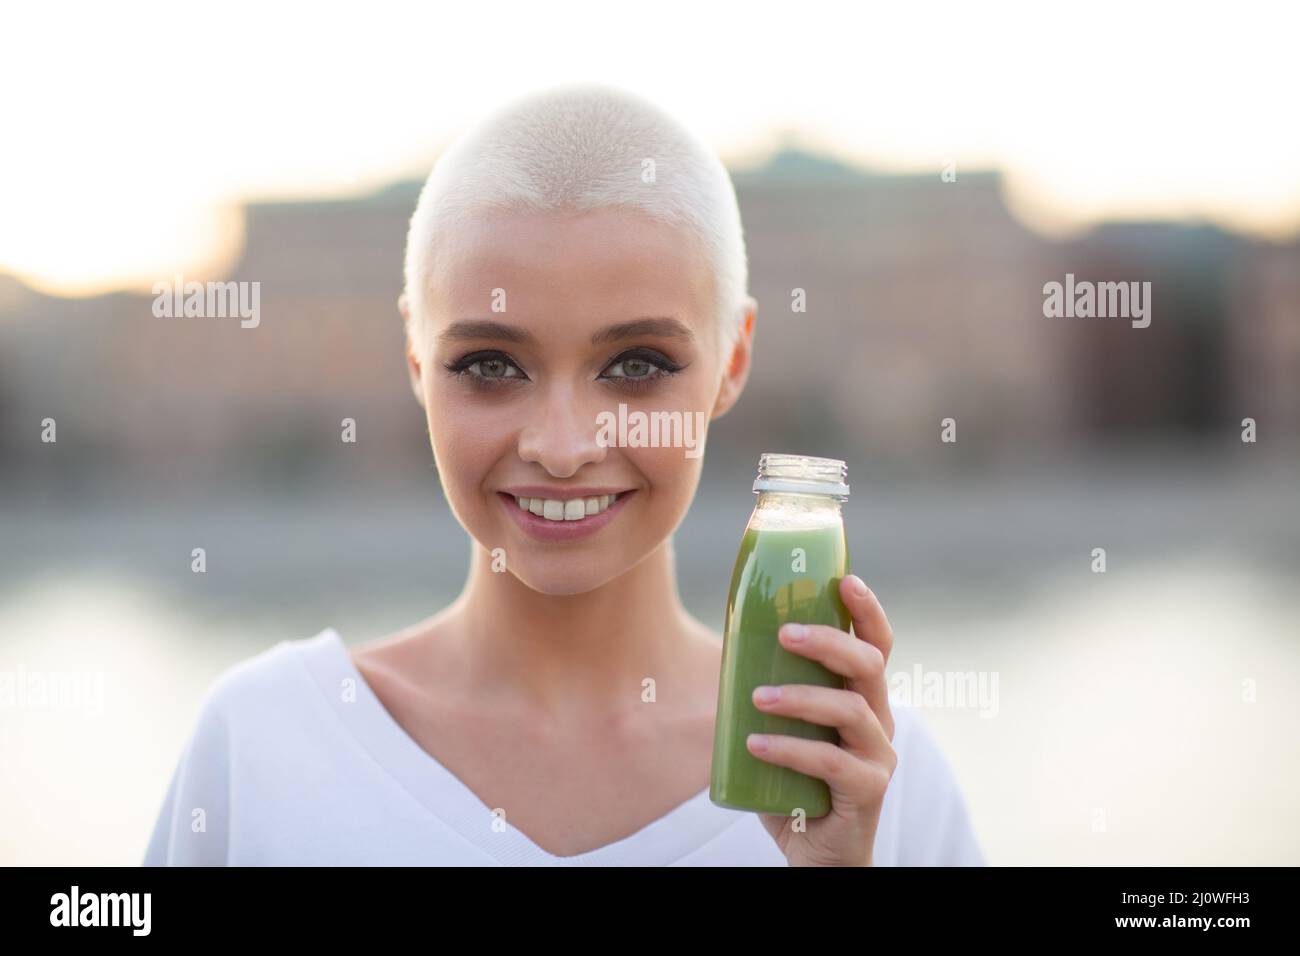 Millenial young woman blonde short hair outdoor with green smoothie Stock Photo